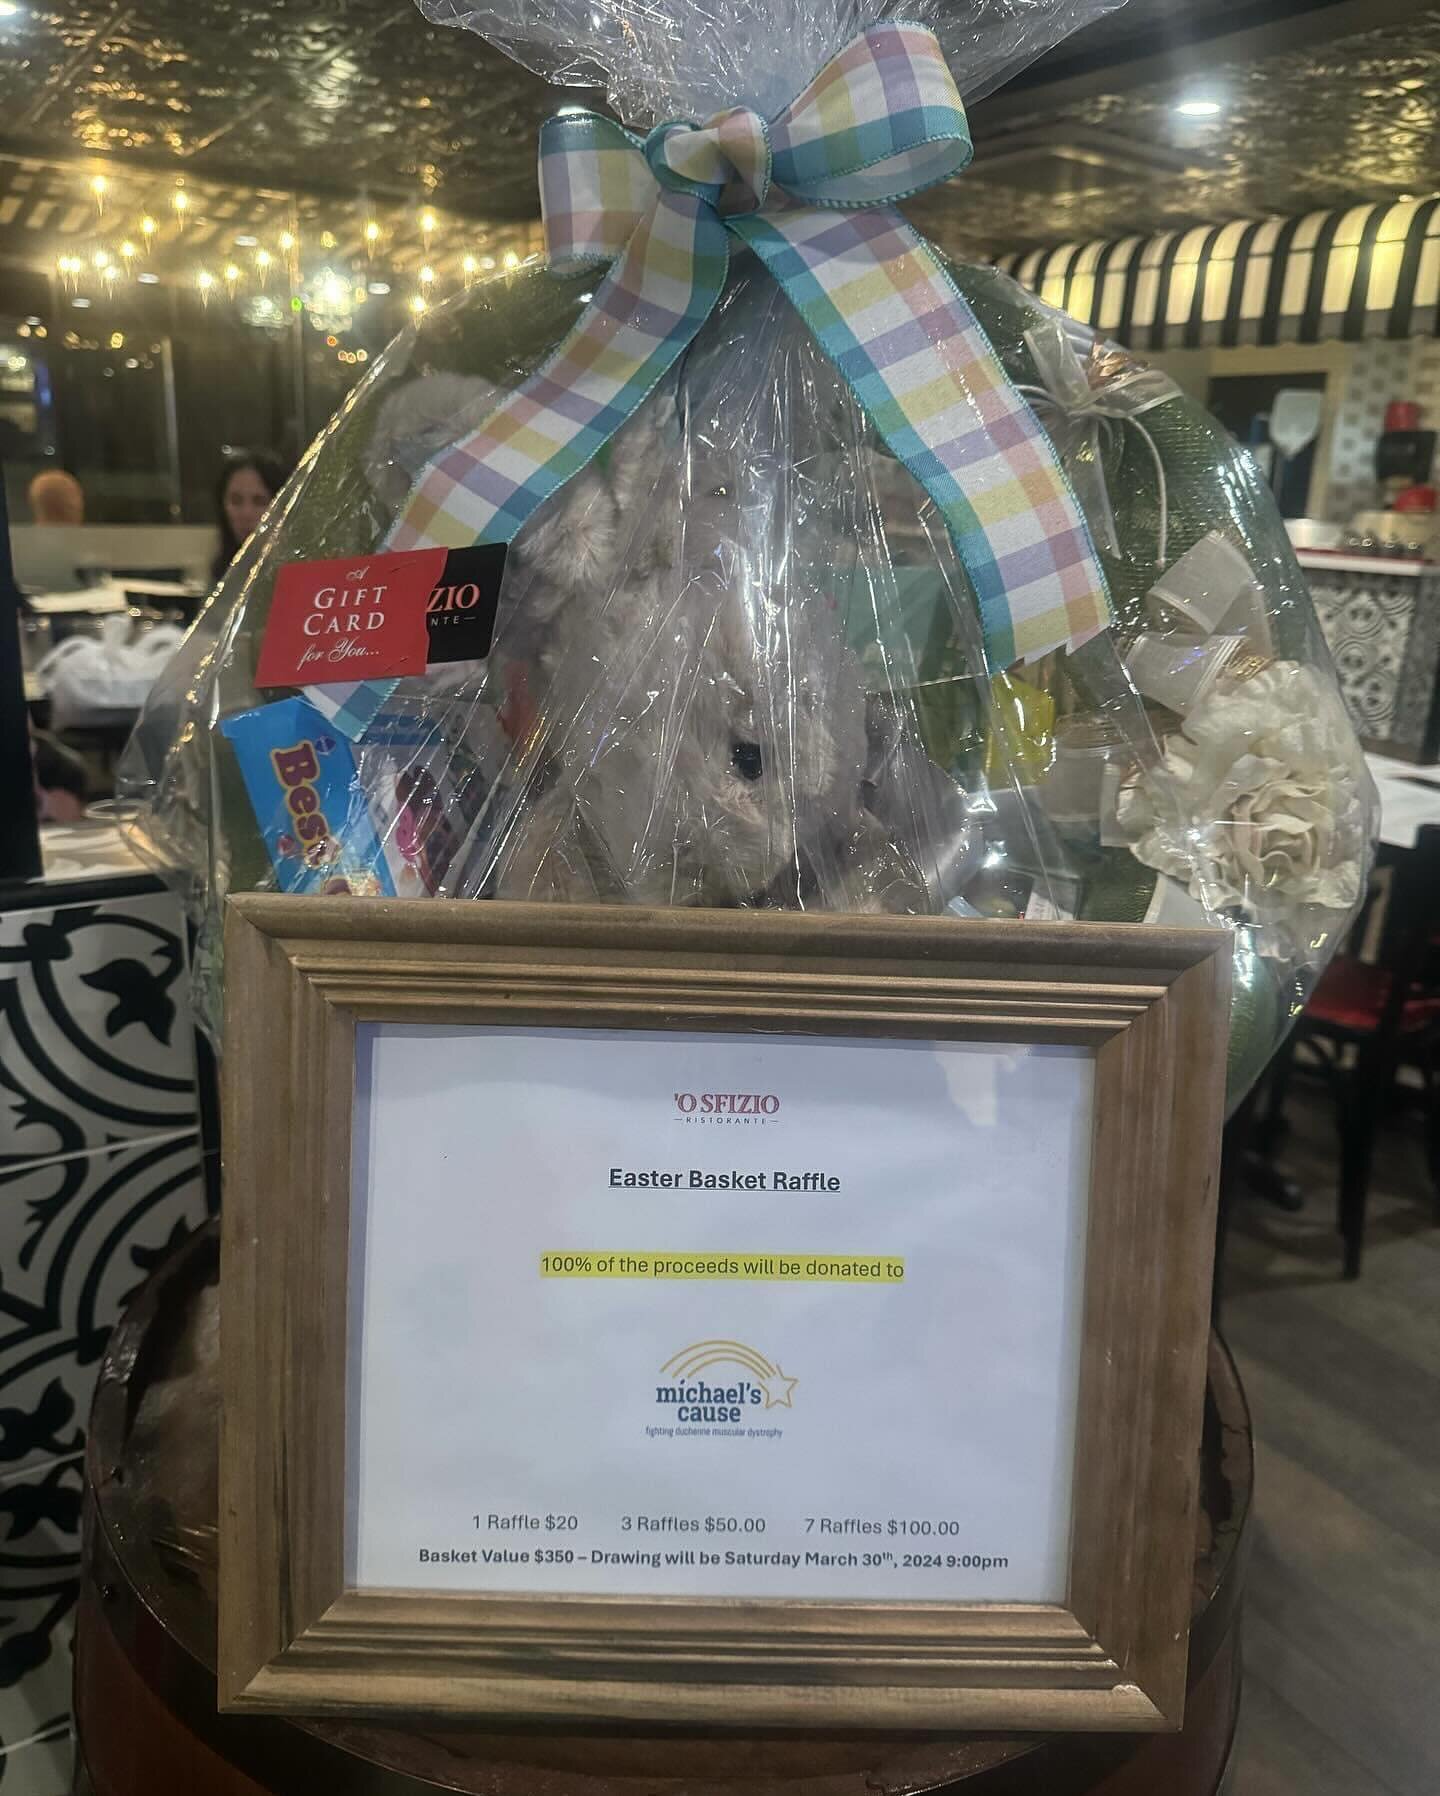 O&rsquo;Sfizio Easter Basket Raffle
100% of the proceeds raised will be donated to Michael&rsquo;s Cause.
1 Raffle $20
3 Raffles $50
7 Raffles $100
Basket Valued at $350 
Drawing will be Saturday March 30th 9pm